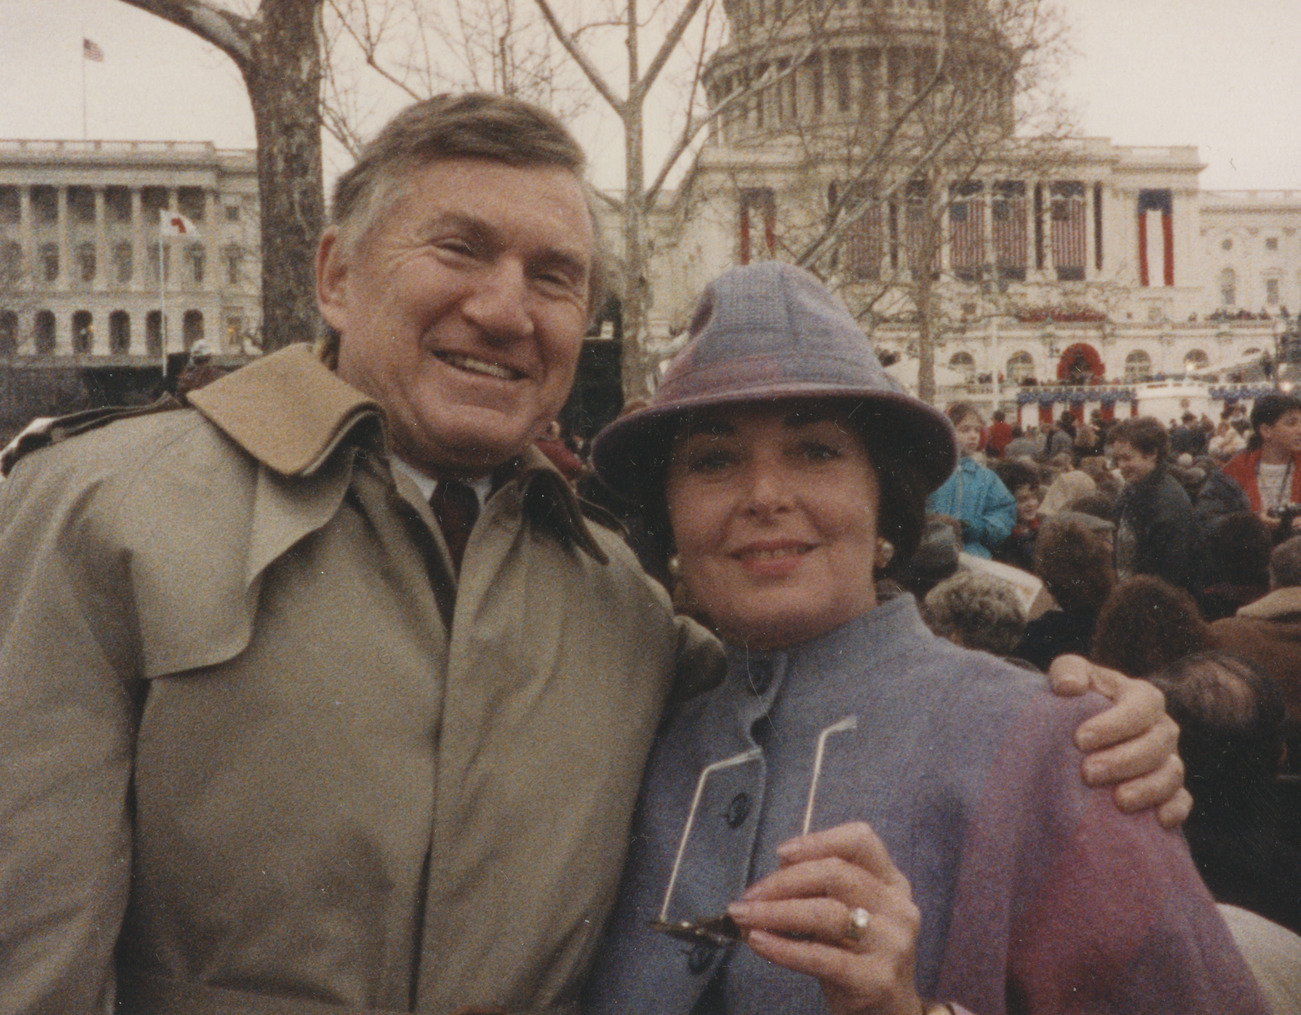 A photo of Ben and Dee Gettler in front of the White House for the Presidential Inauguration of Ronald Reagan.